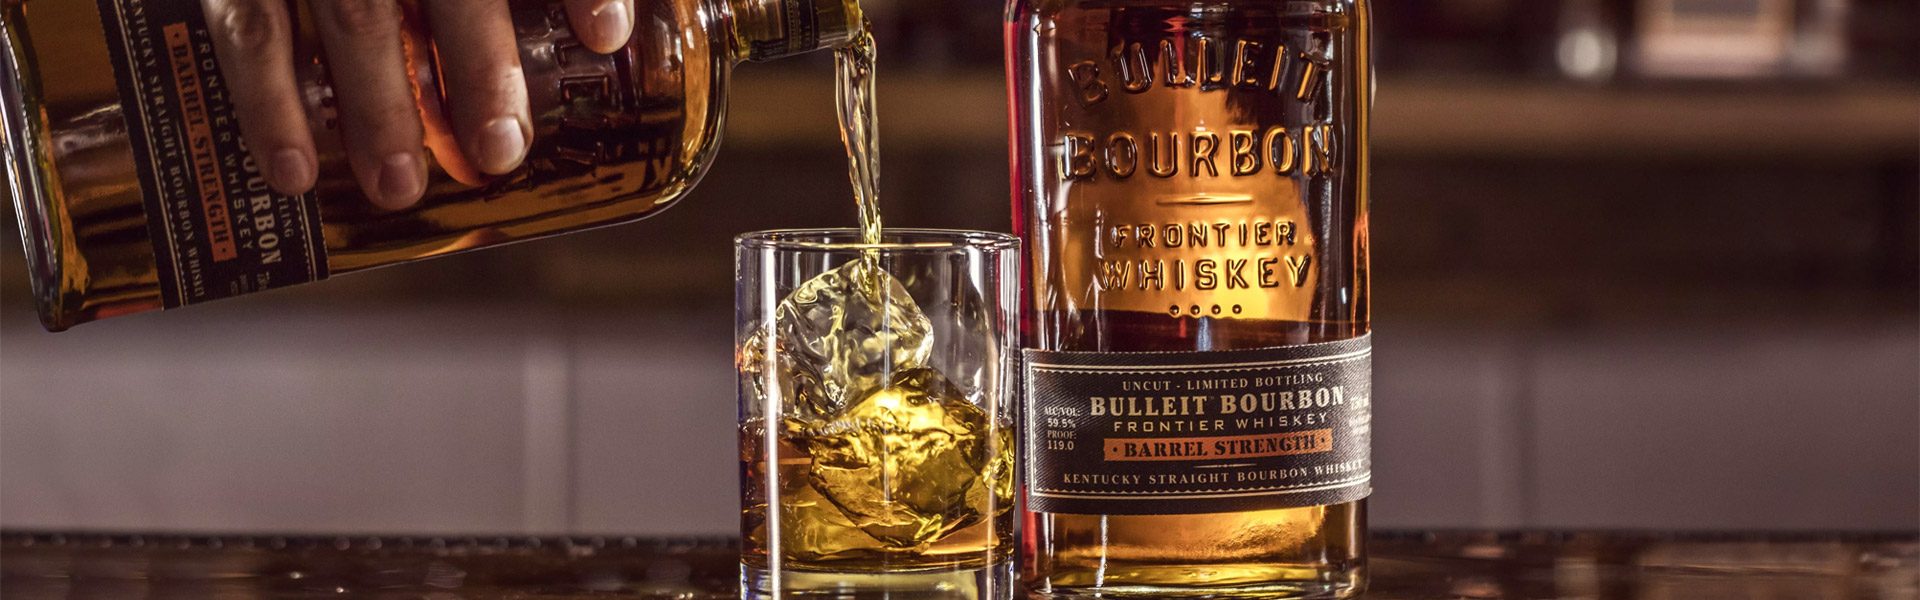 Bourbon Bucket 20 Best Bourbons You Need to Try at Least Once | Cool Material